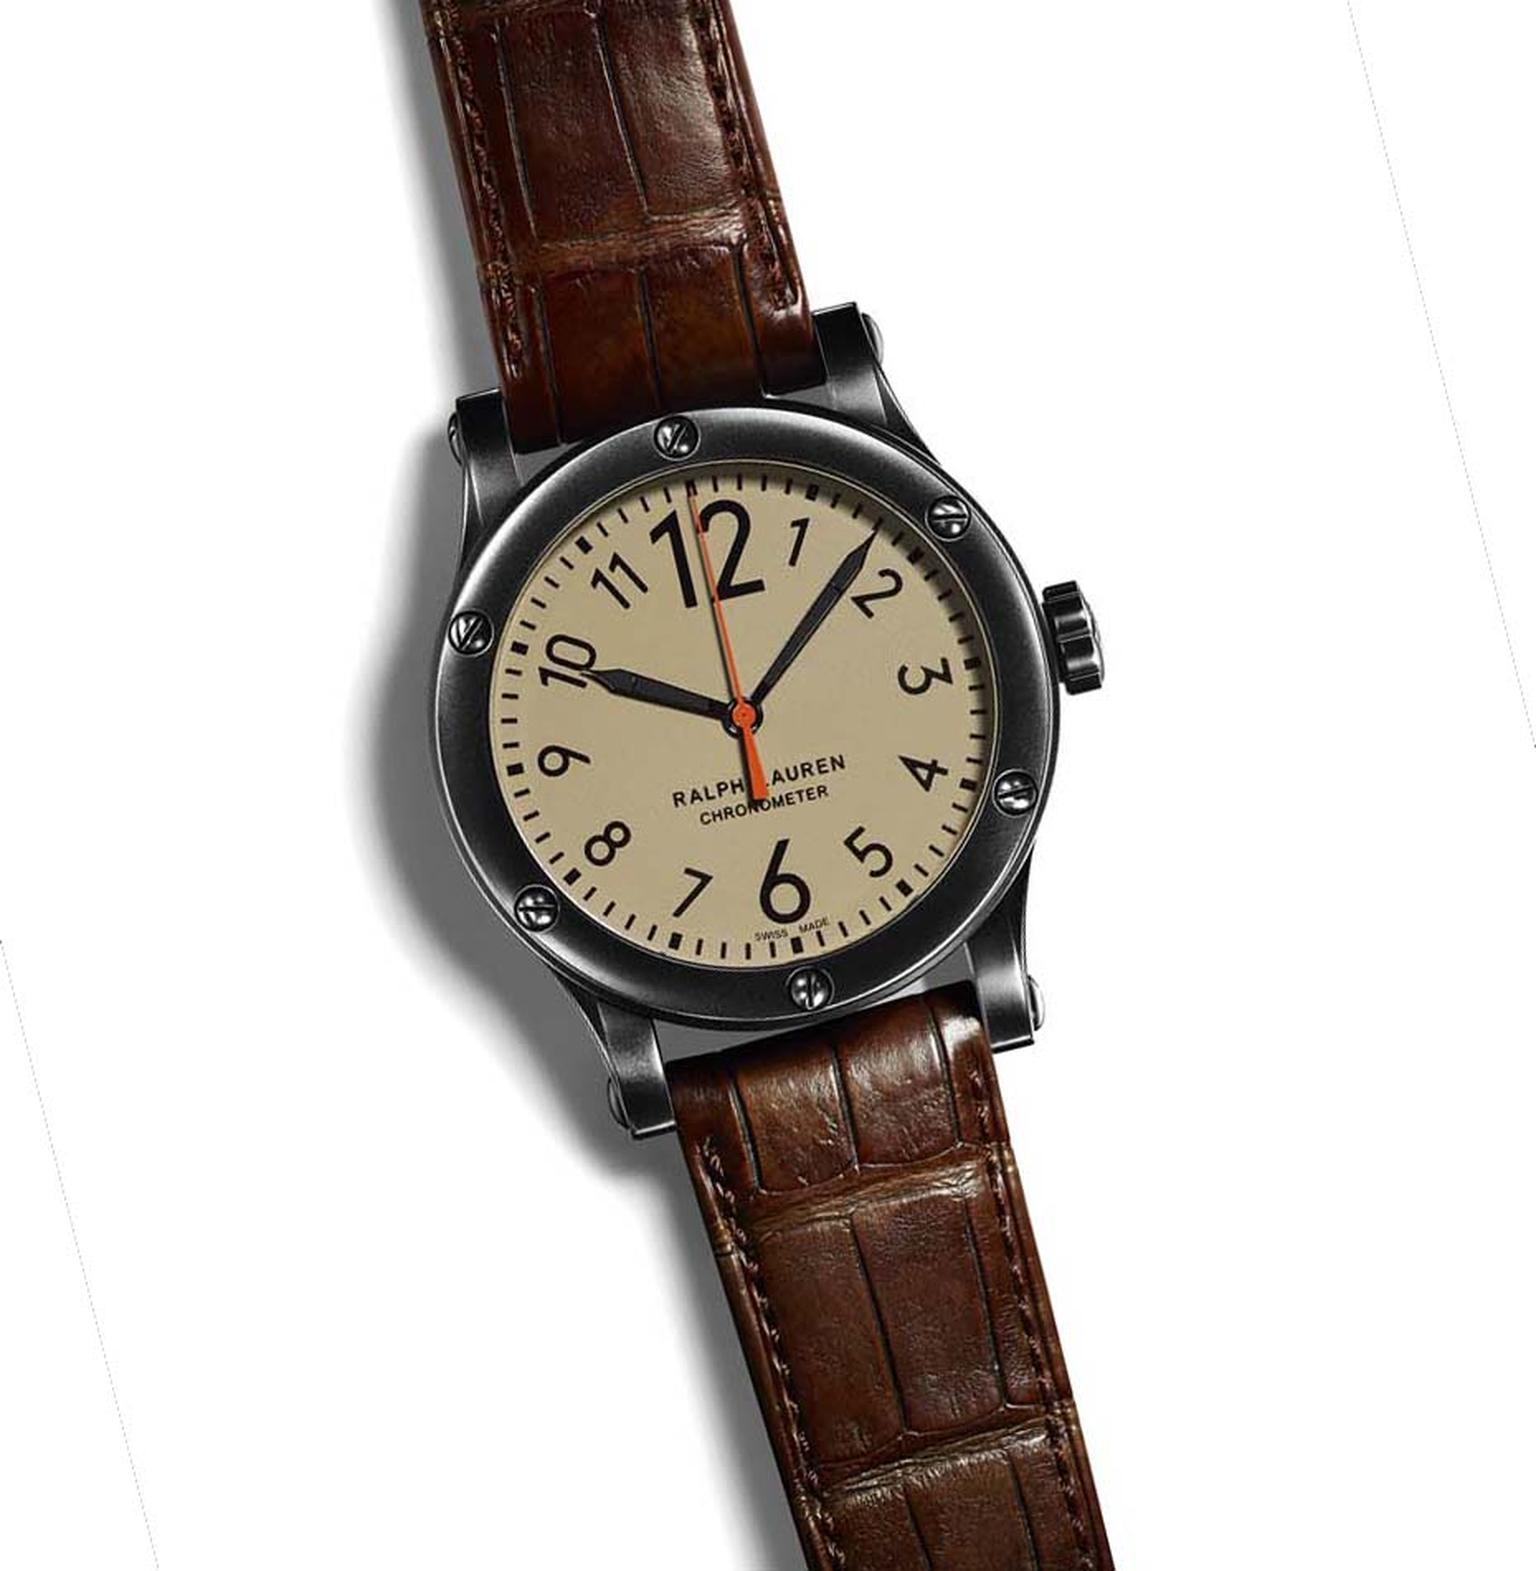 Ralph Lauren watches RL67 Safari Chronometer has been kitted out with a khaki-coloured dial and is presented in a 39 or 45mm stainless steel case with a blackened finish.